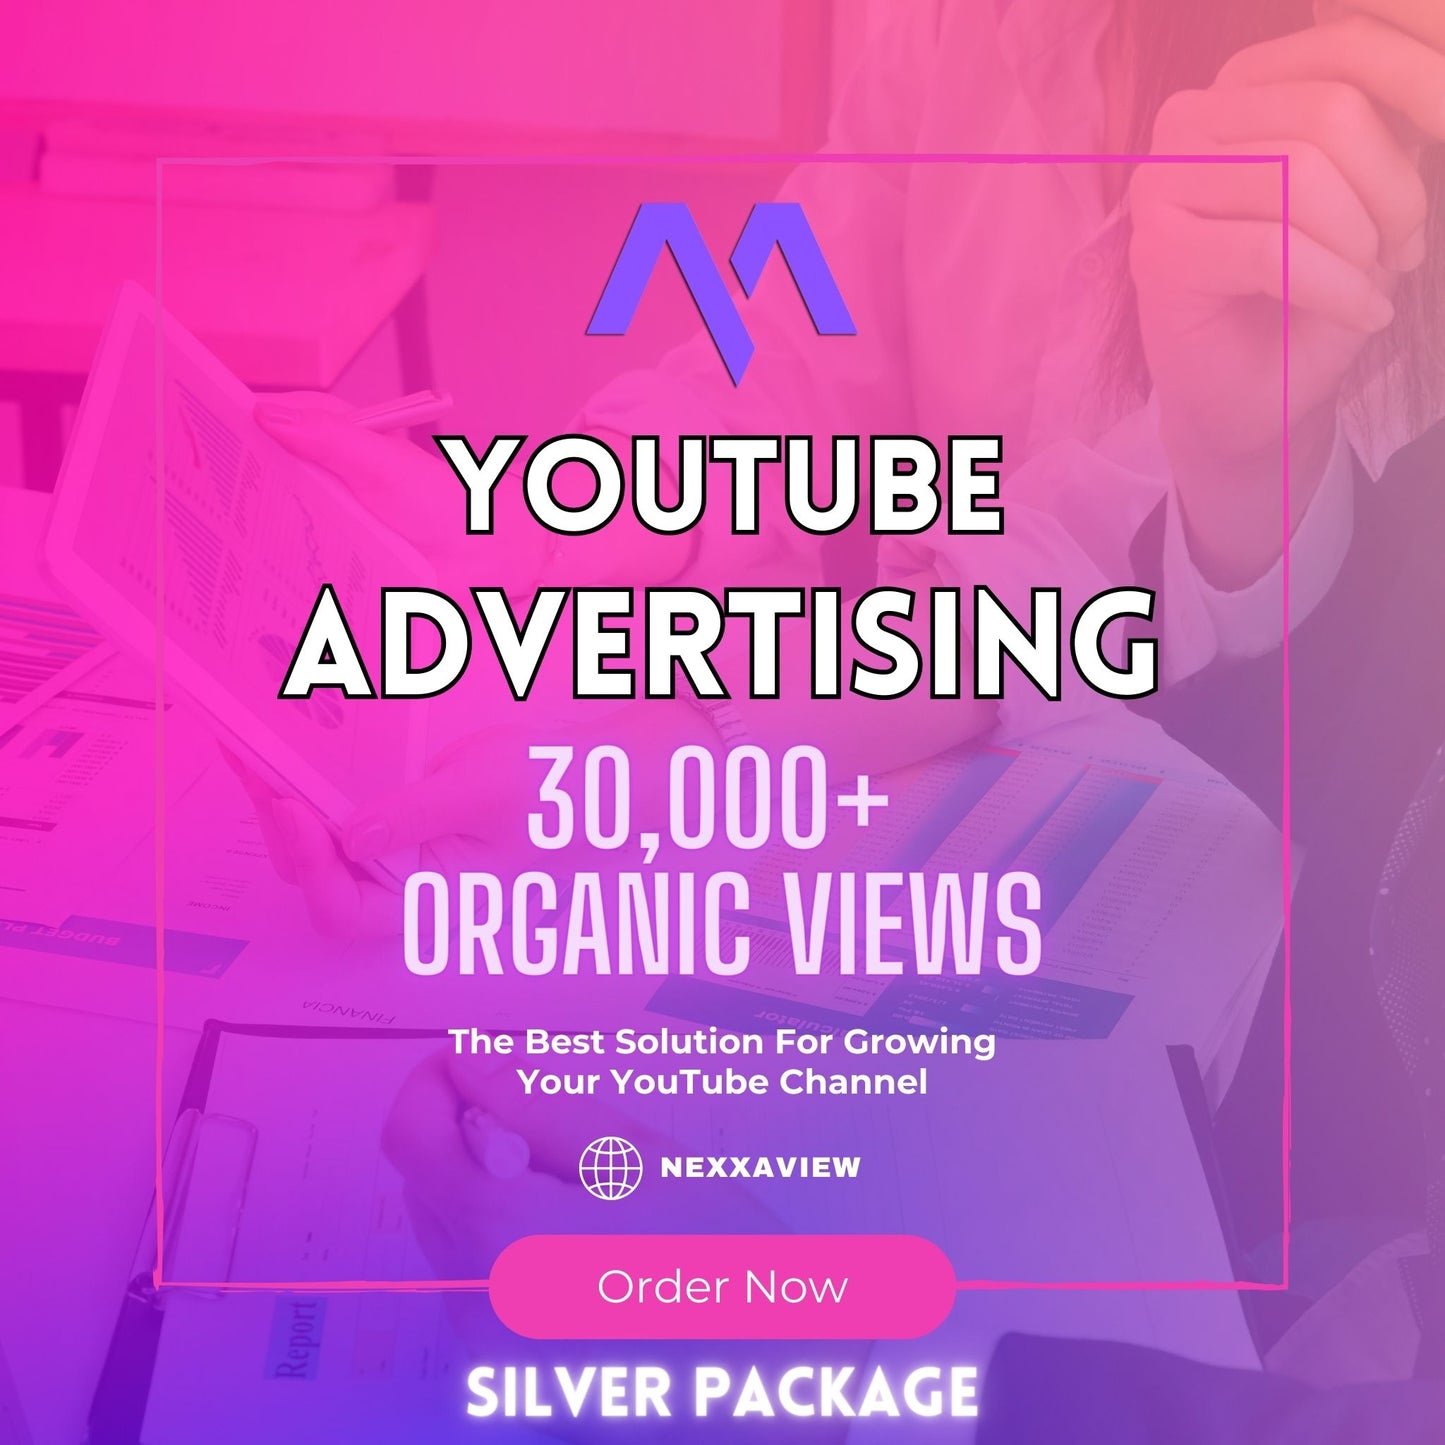 YouTube Advertising Silver Package